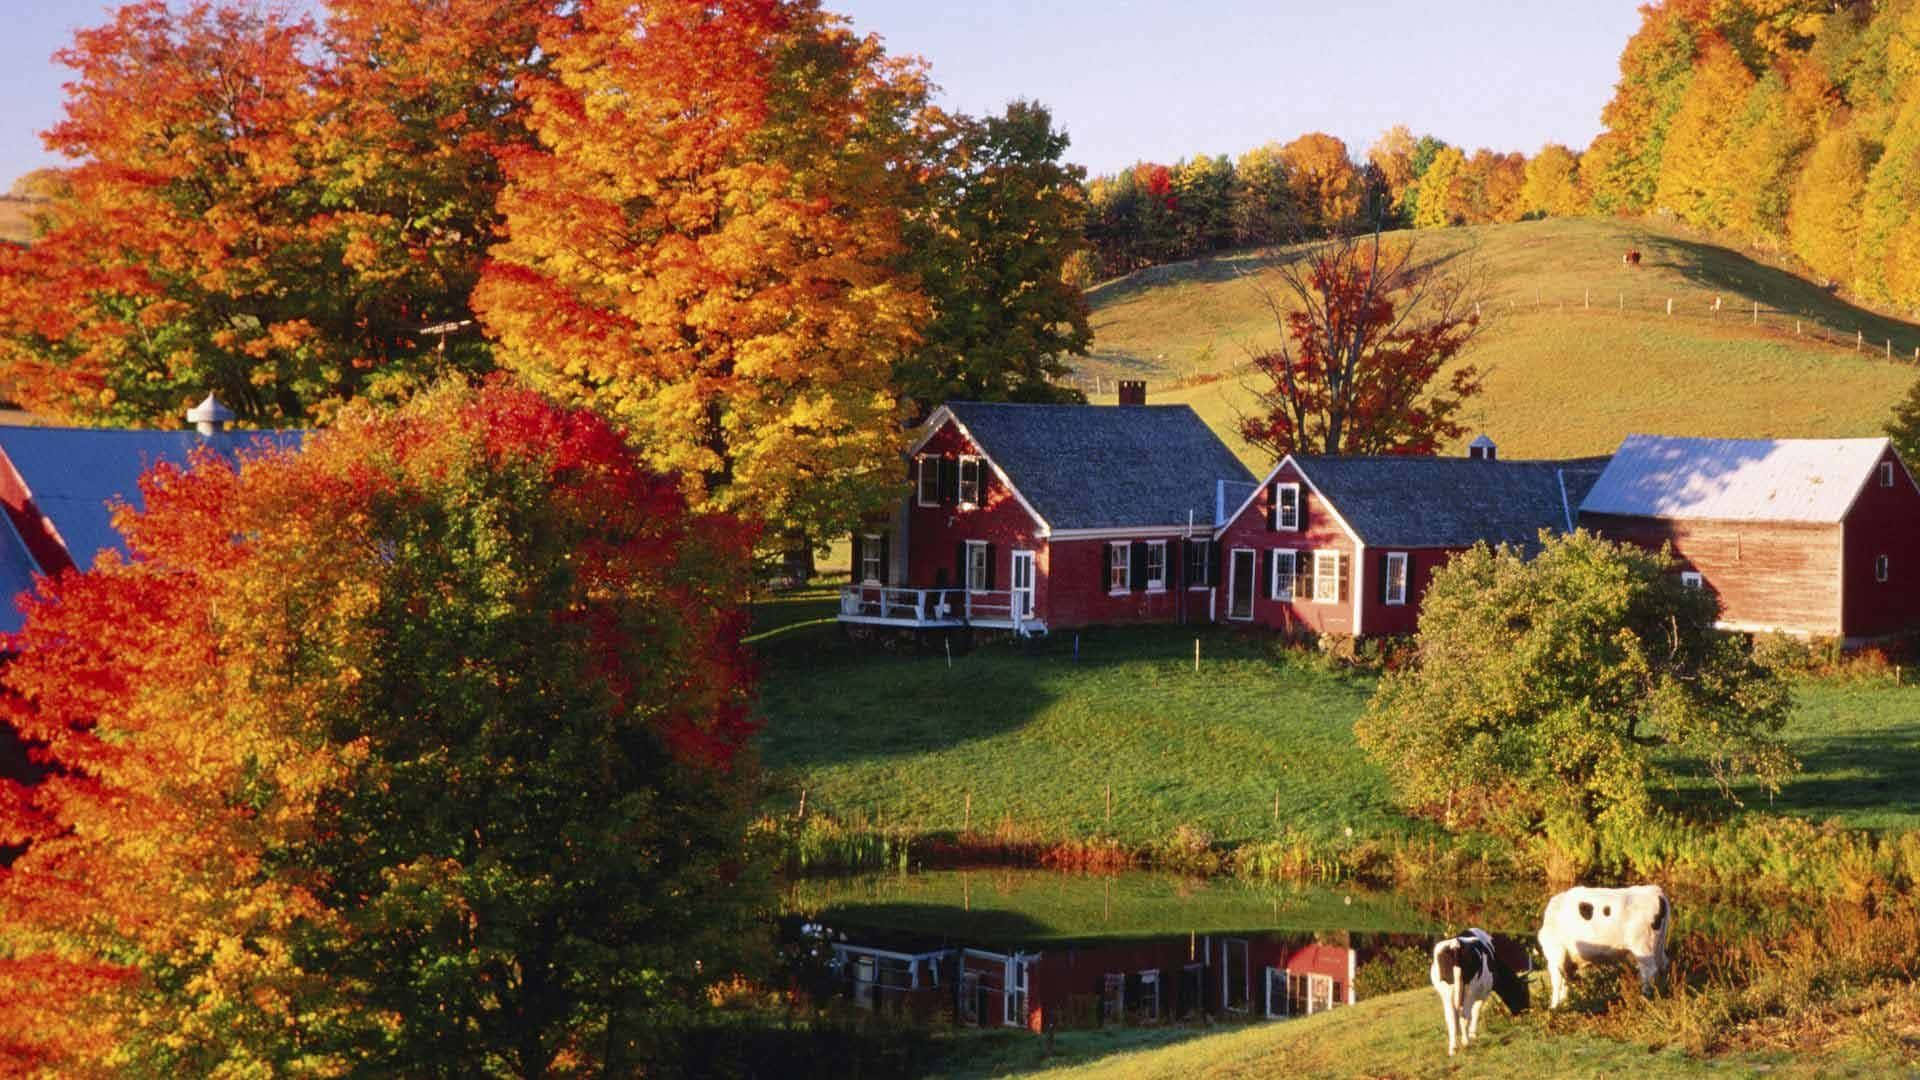 A Farm With Cows And Trees In The Fall Wallpaper